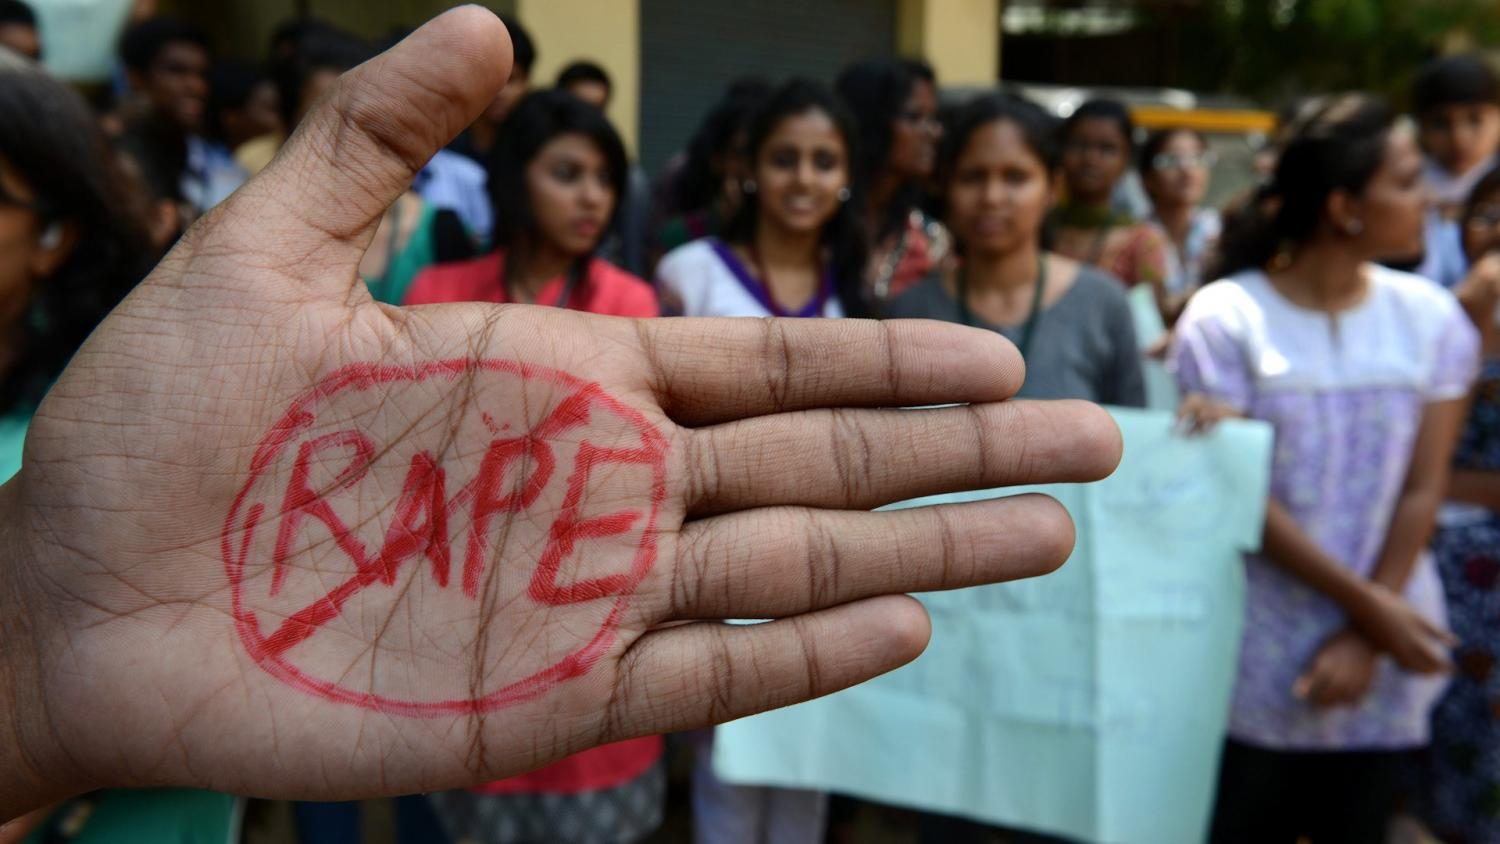 Indian+students+of+Saint+Joseph+Degree+college+participate+during+an+anti-rape+protest+in+Hyderabad+on+September+13%2C+2013.